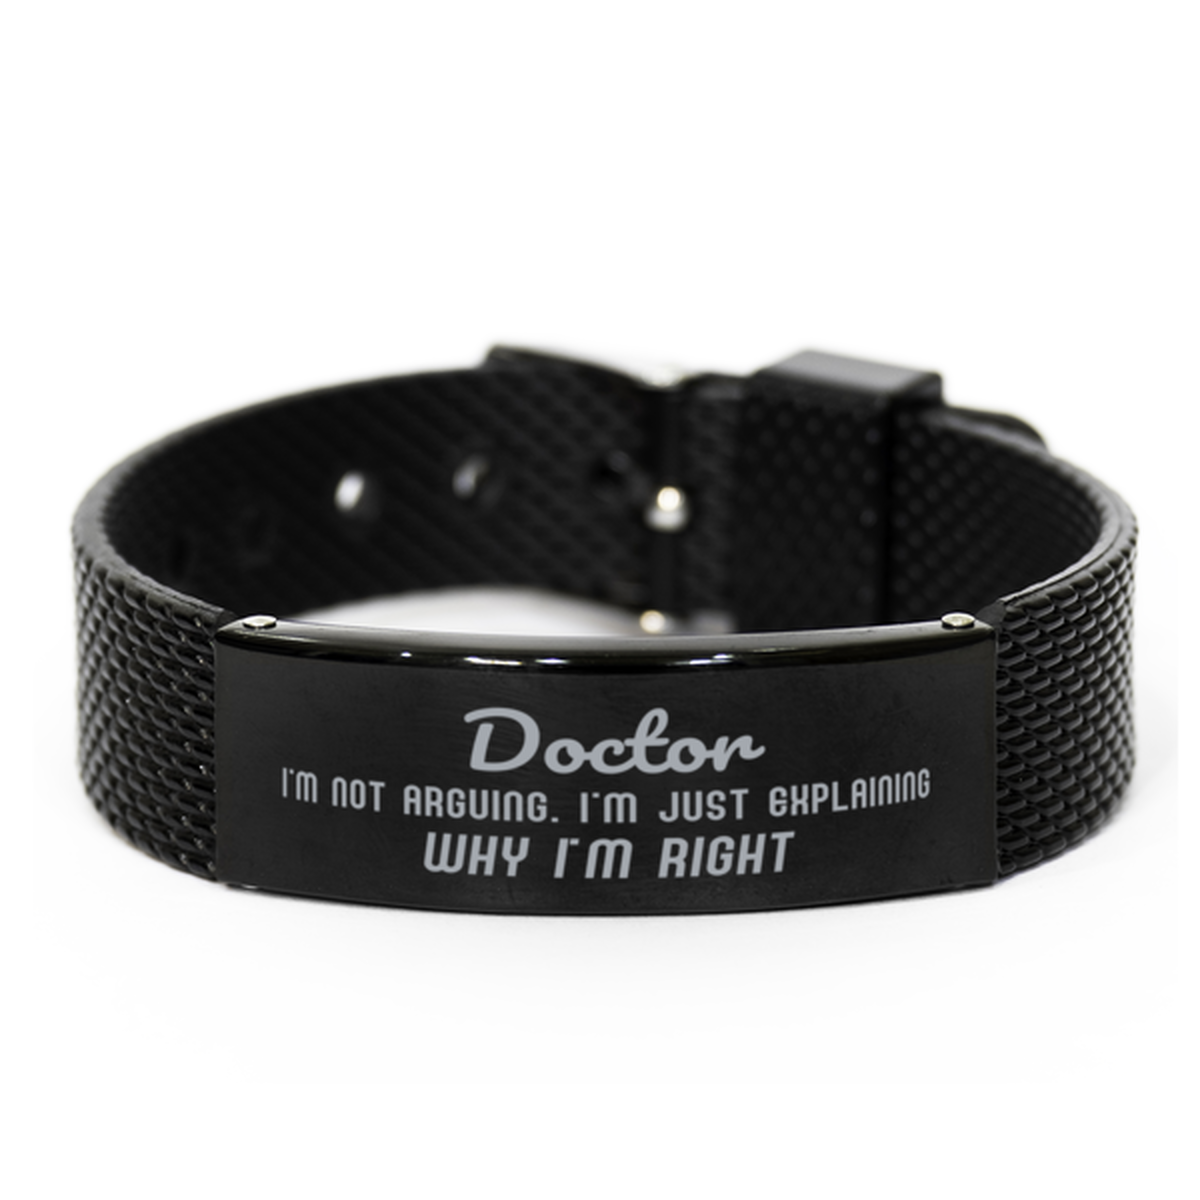 Doctor I'm not Arguing. I'm Just Explaining Why I'm RIGHT Black Shark Mesh Bracelet, Funny Saying Quote Doctor Gifts For Doctor Graduation Birthday Christmas Gifts for Men Women Coworker